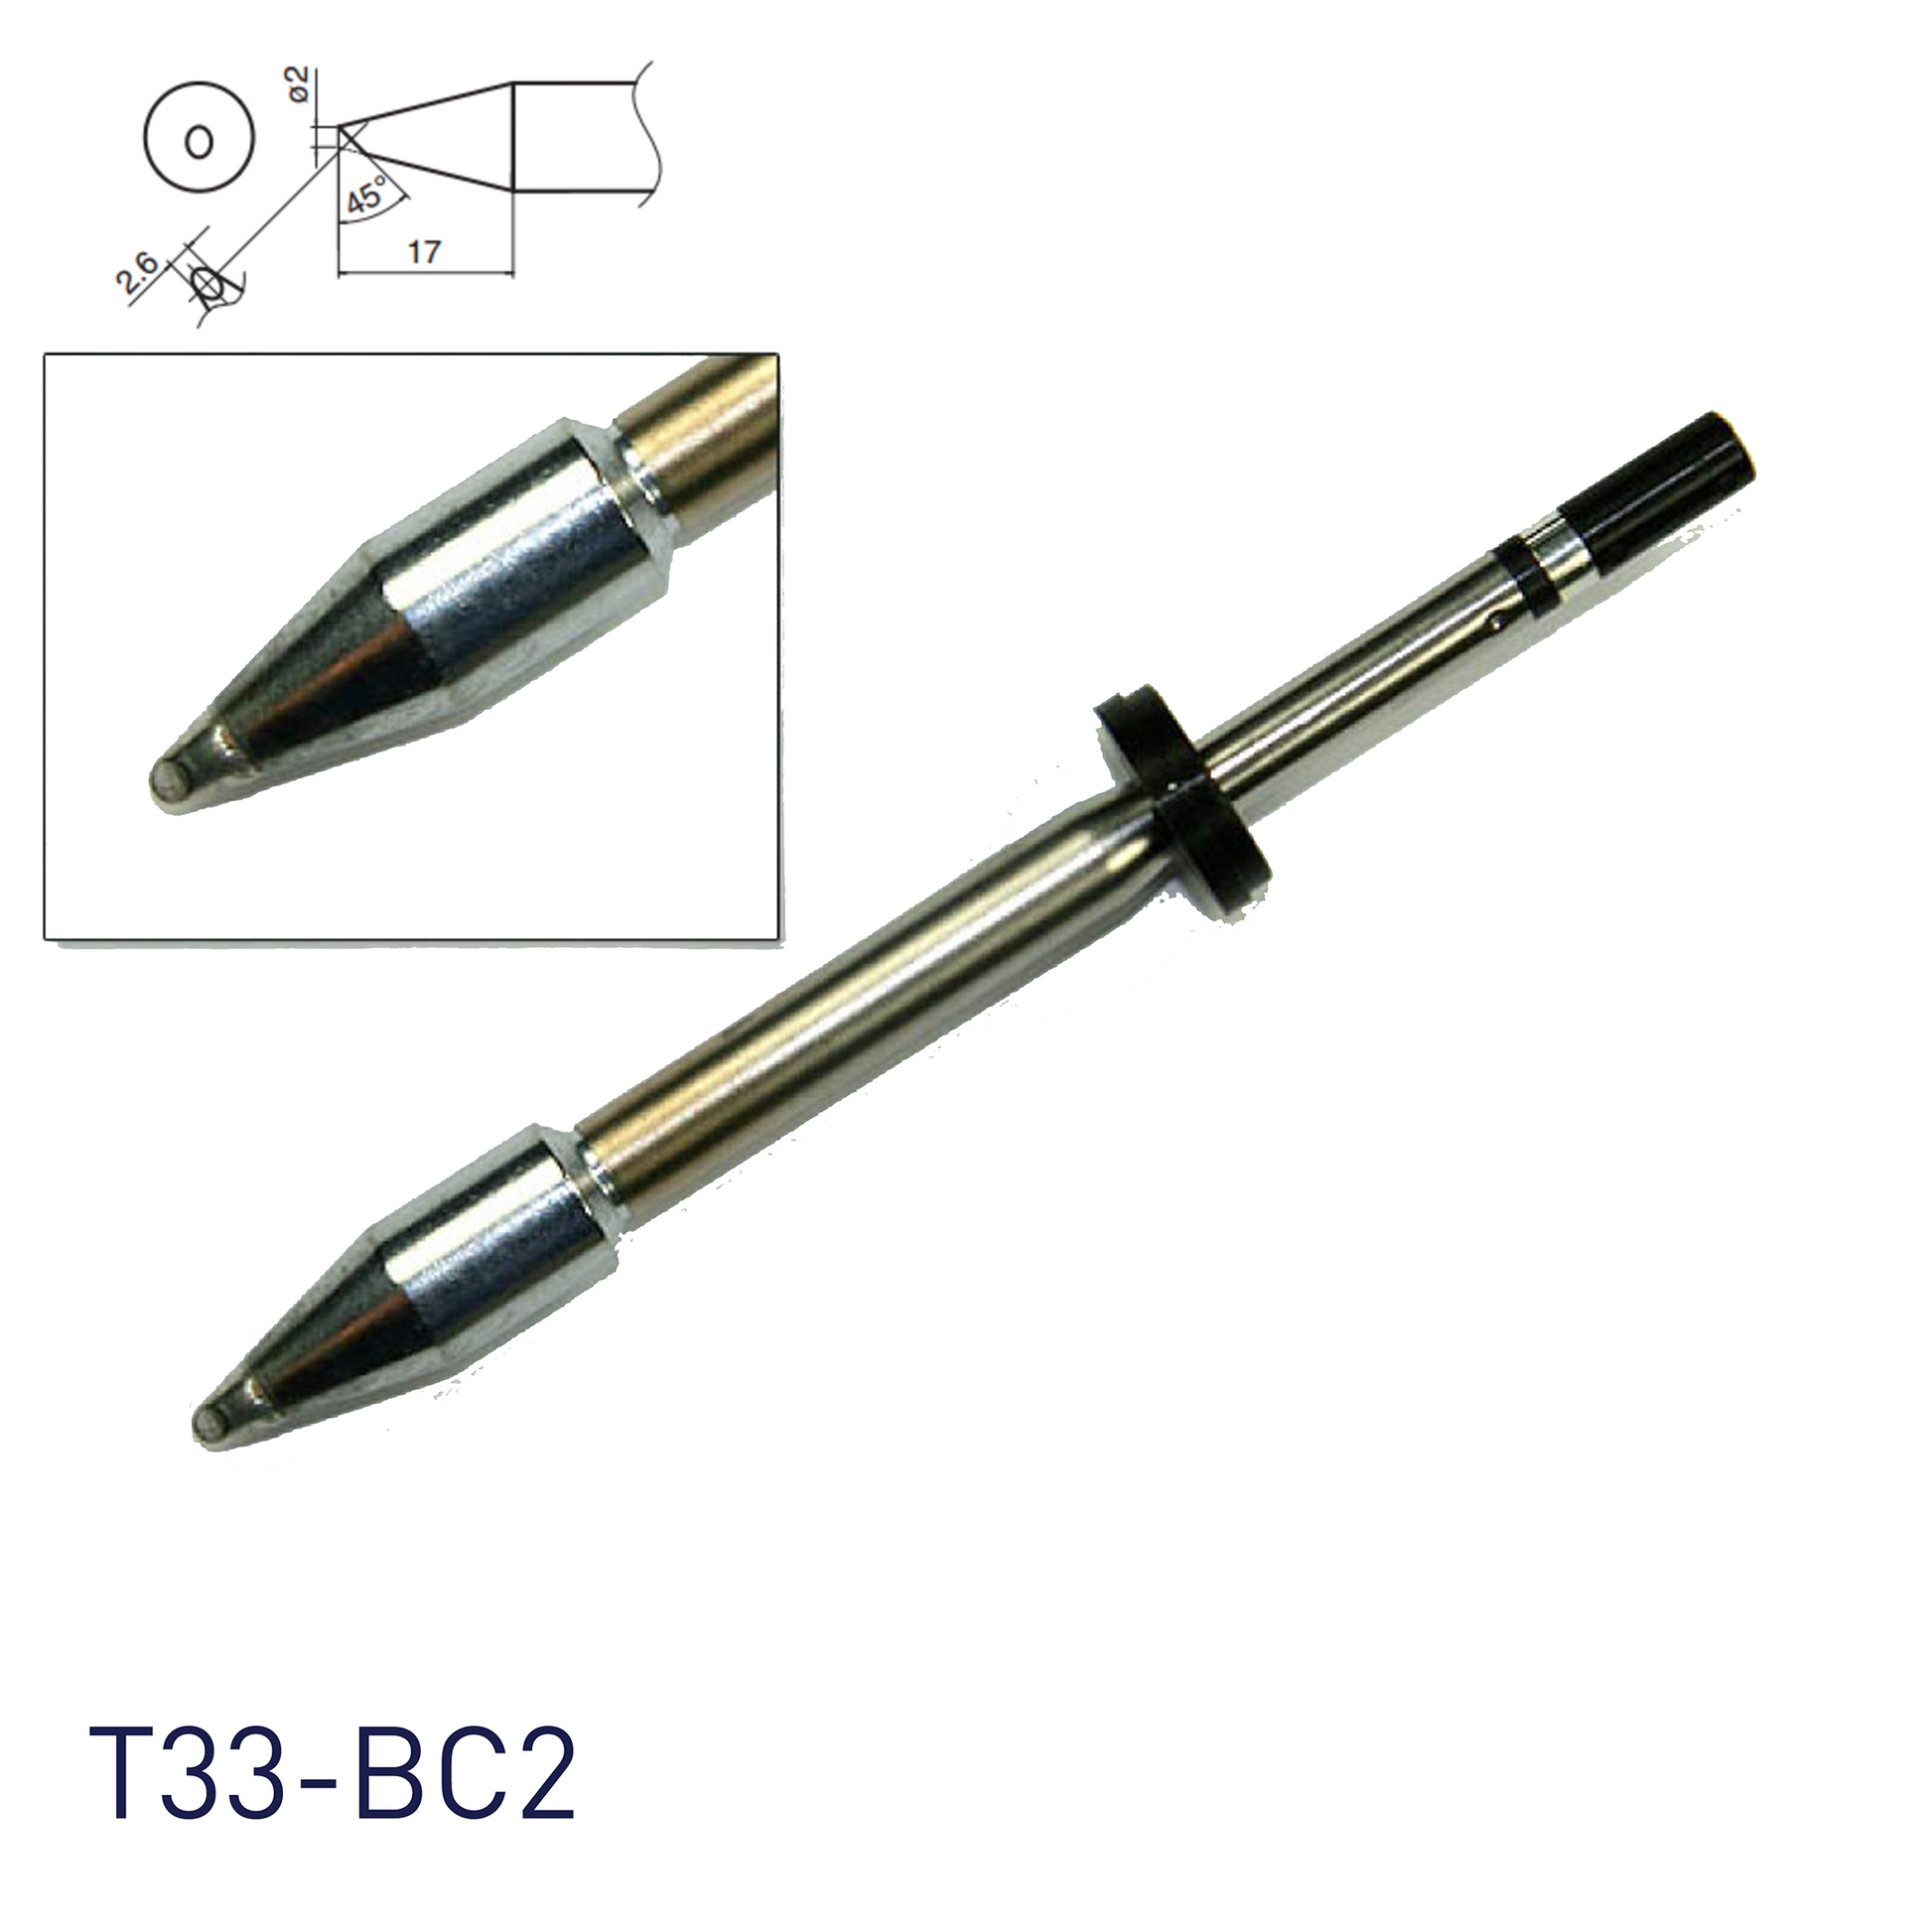 Hakko Products_ T33 / T33-SS Series Soldering Tips_ Soldering Tips_ Hakko Products